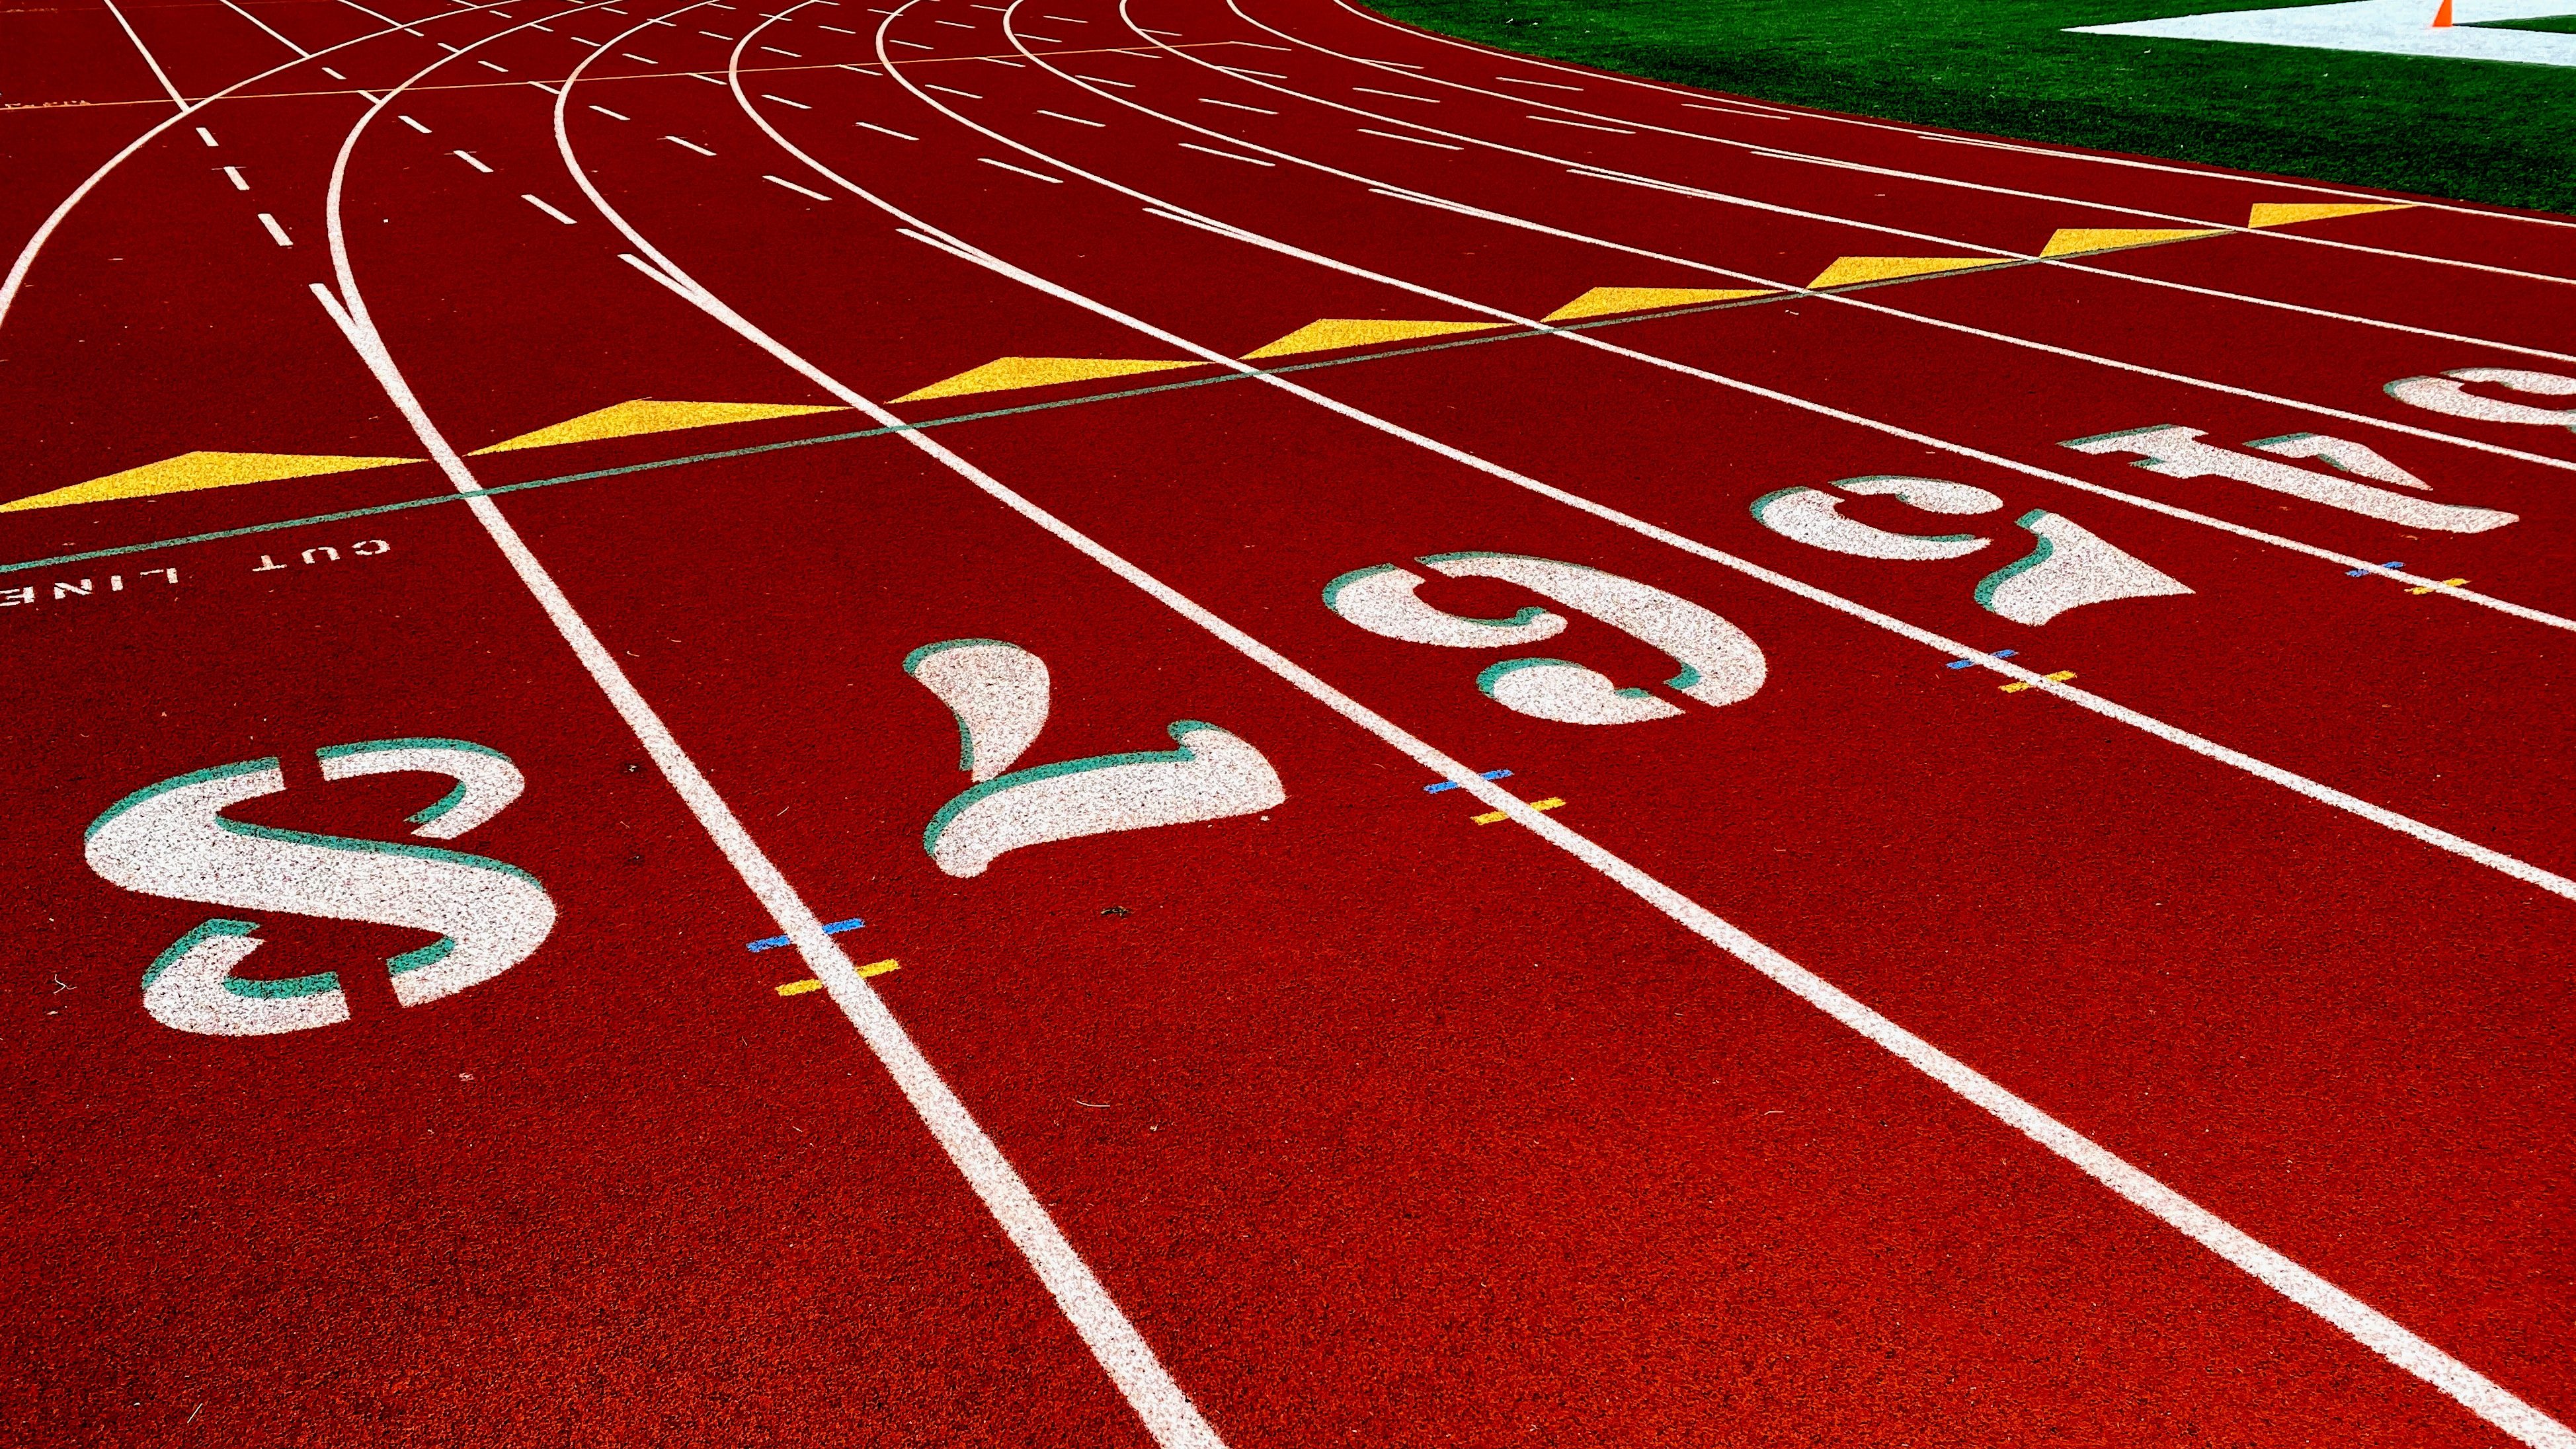 A race track for running, with lanes numbered 1-8 at the start line.